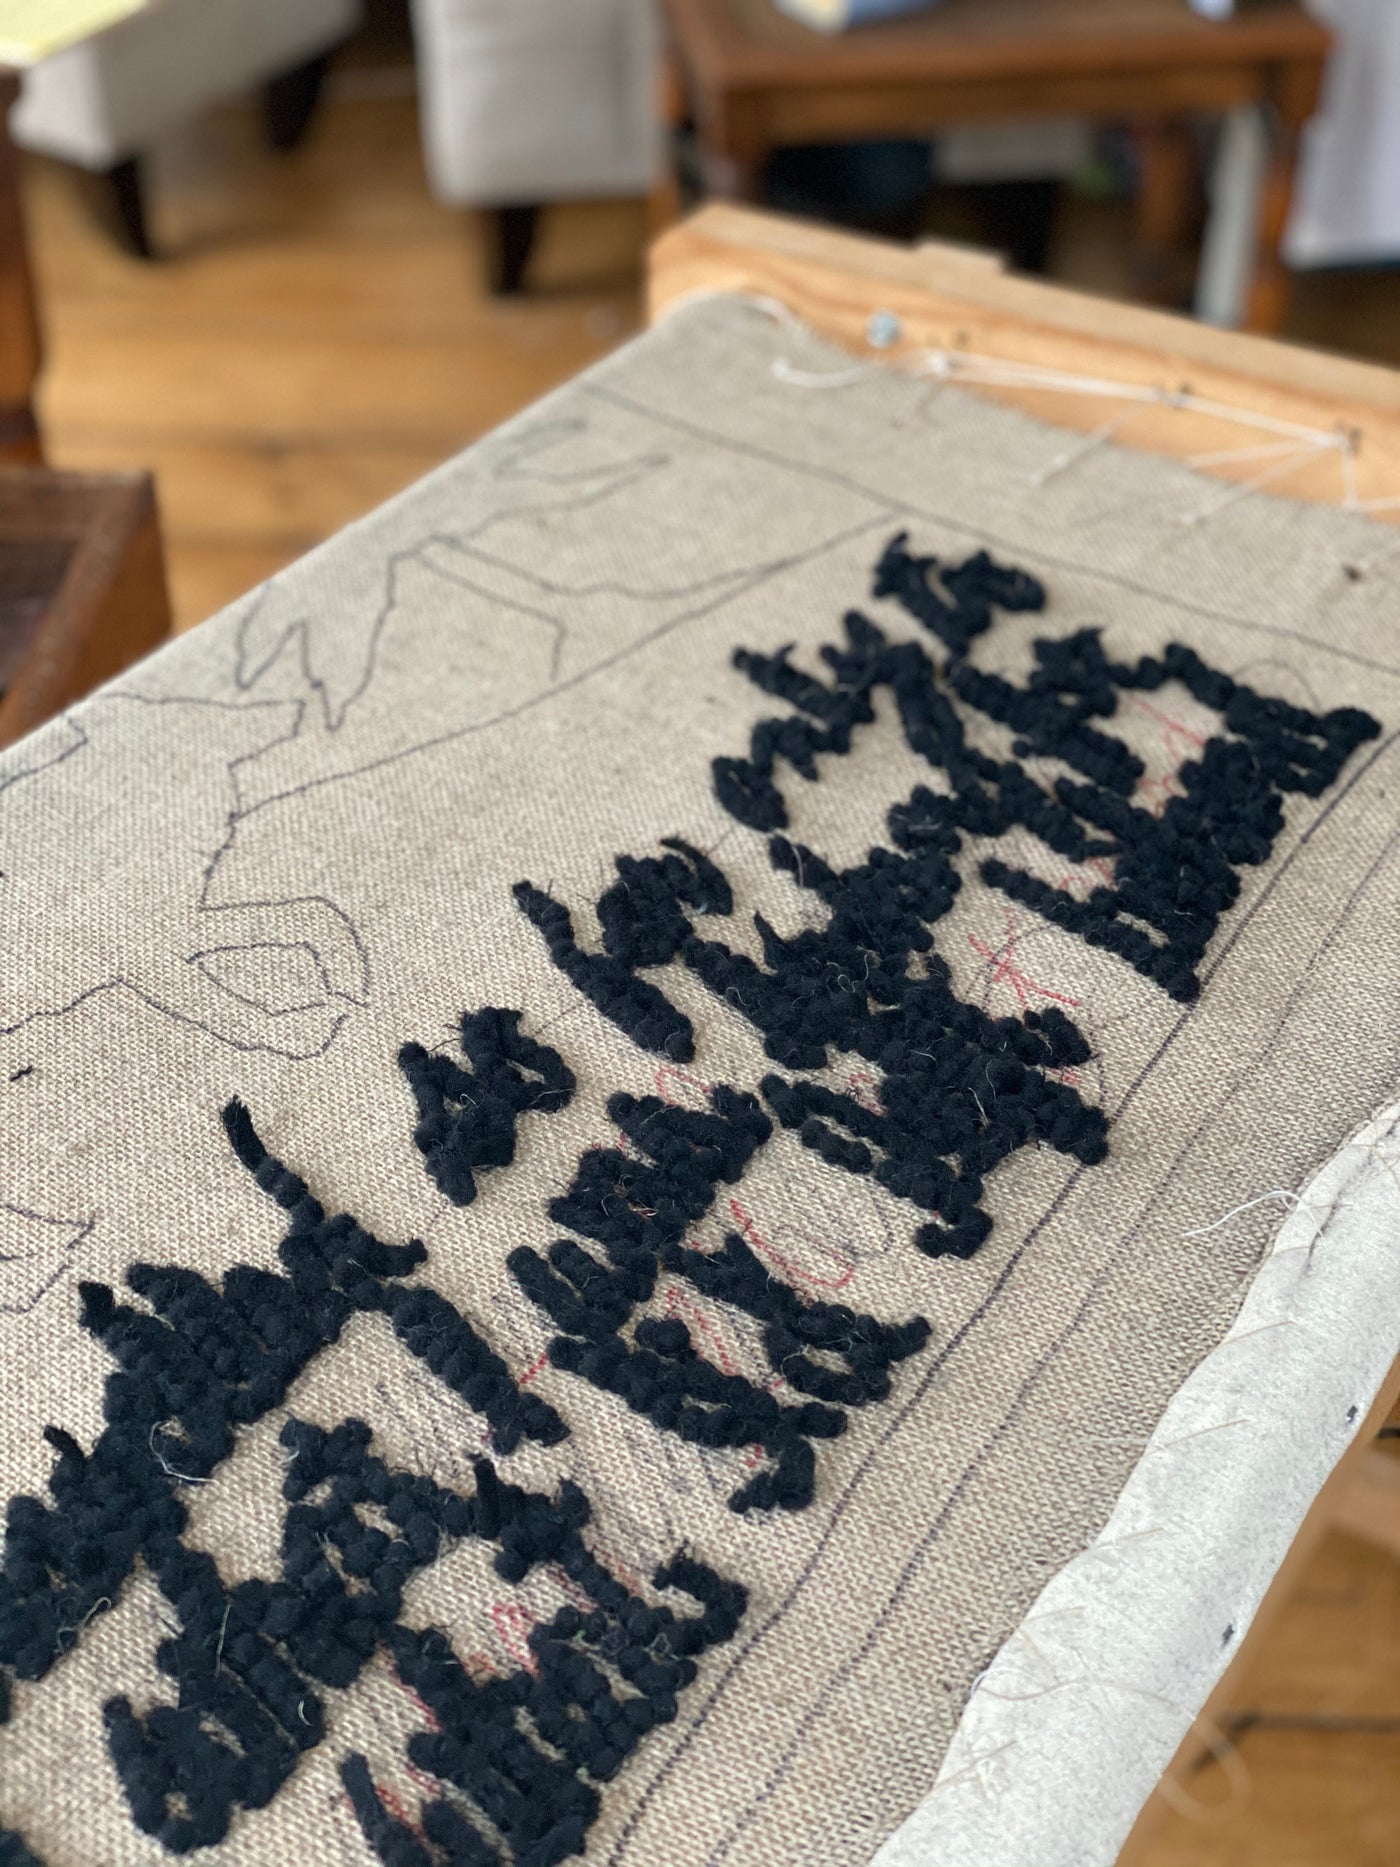 Tips for Finishing Hooked Rugs